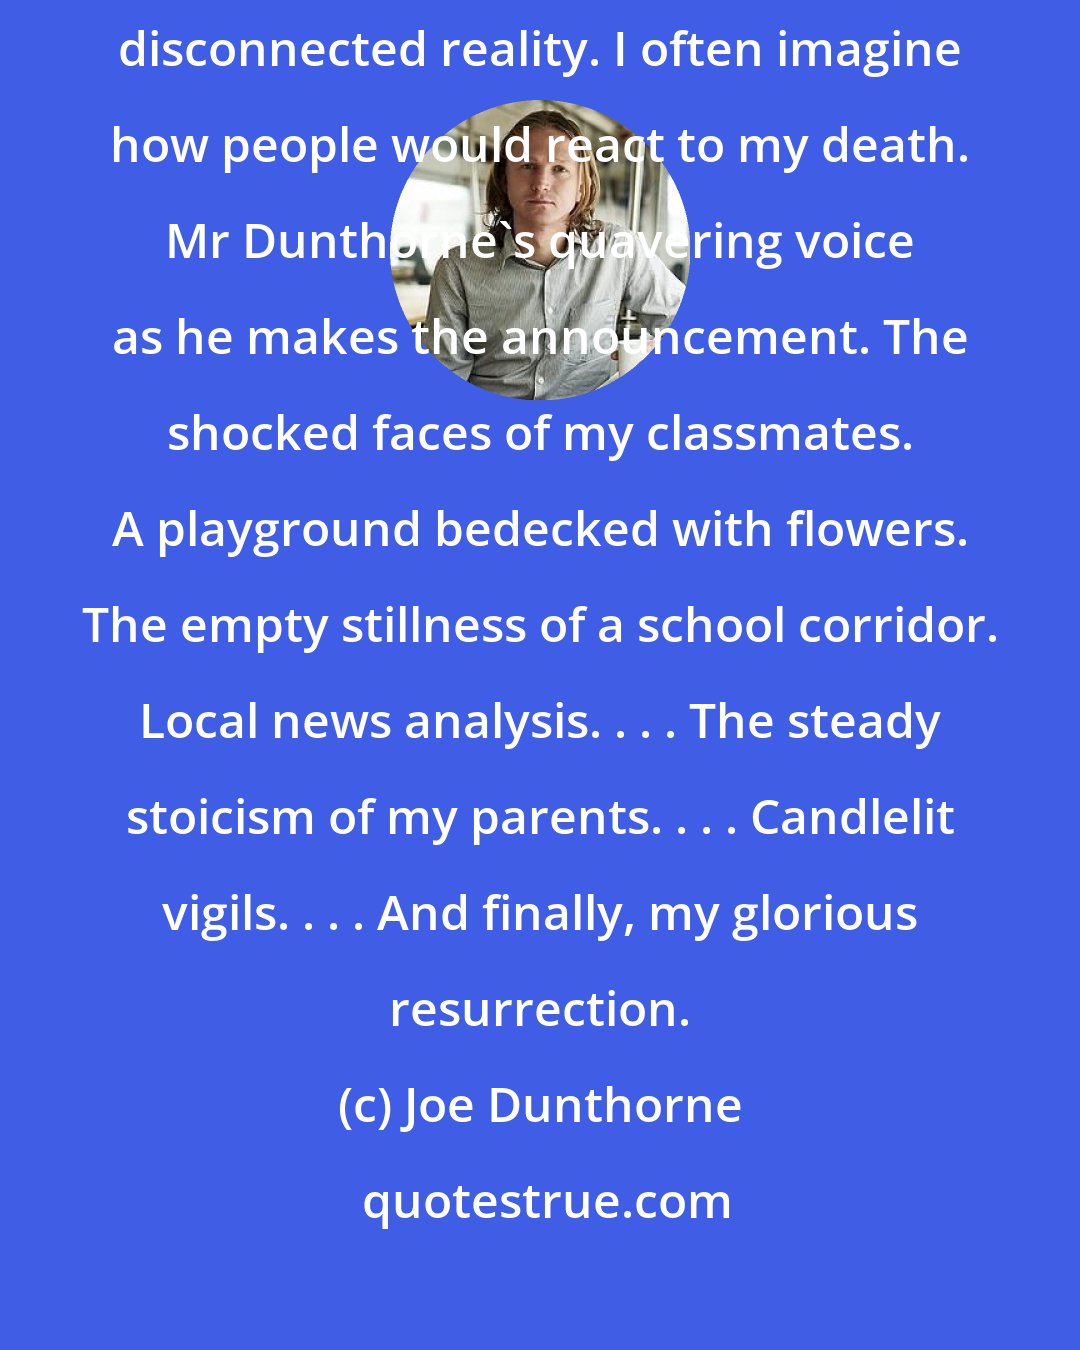 Joe Dunthorne: I find that the only way to get through life is to picture myself in an entirely disconnected reality. I often imagine how people would react to my death. Mr Dunthorne's quavering voice as he makes the announcement. The shocked faces of my classmates. A playground bedecked with flowers. The empty stillness of a school corridor. Local news analysis. . . . The steady stoicism of my parents. . . . Candlelit vigils. . . . And finally, my glorious resurrection.